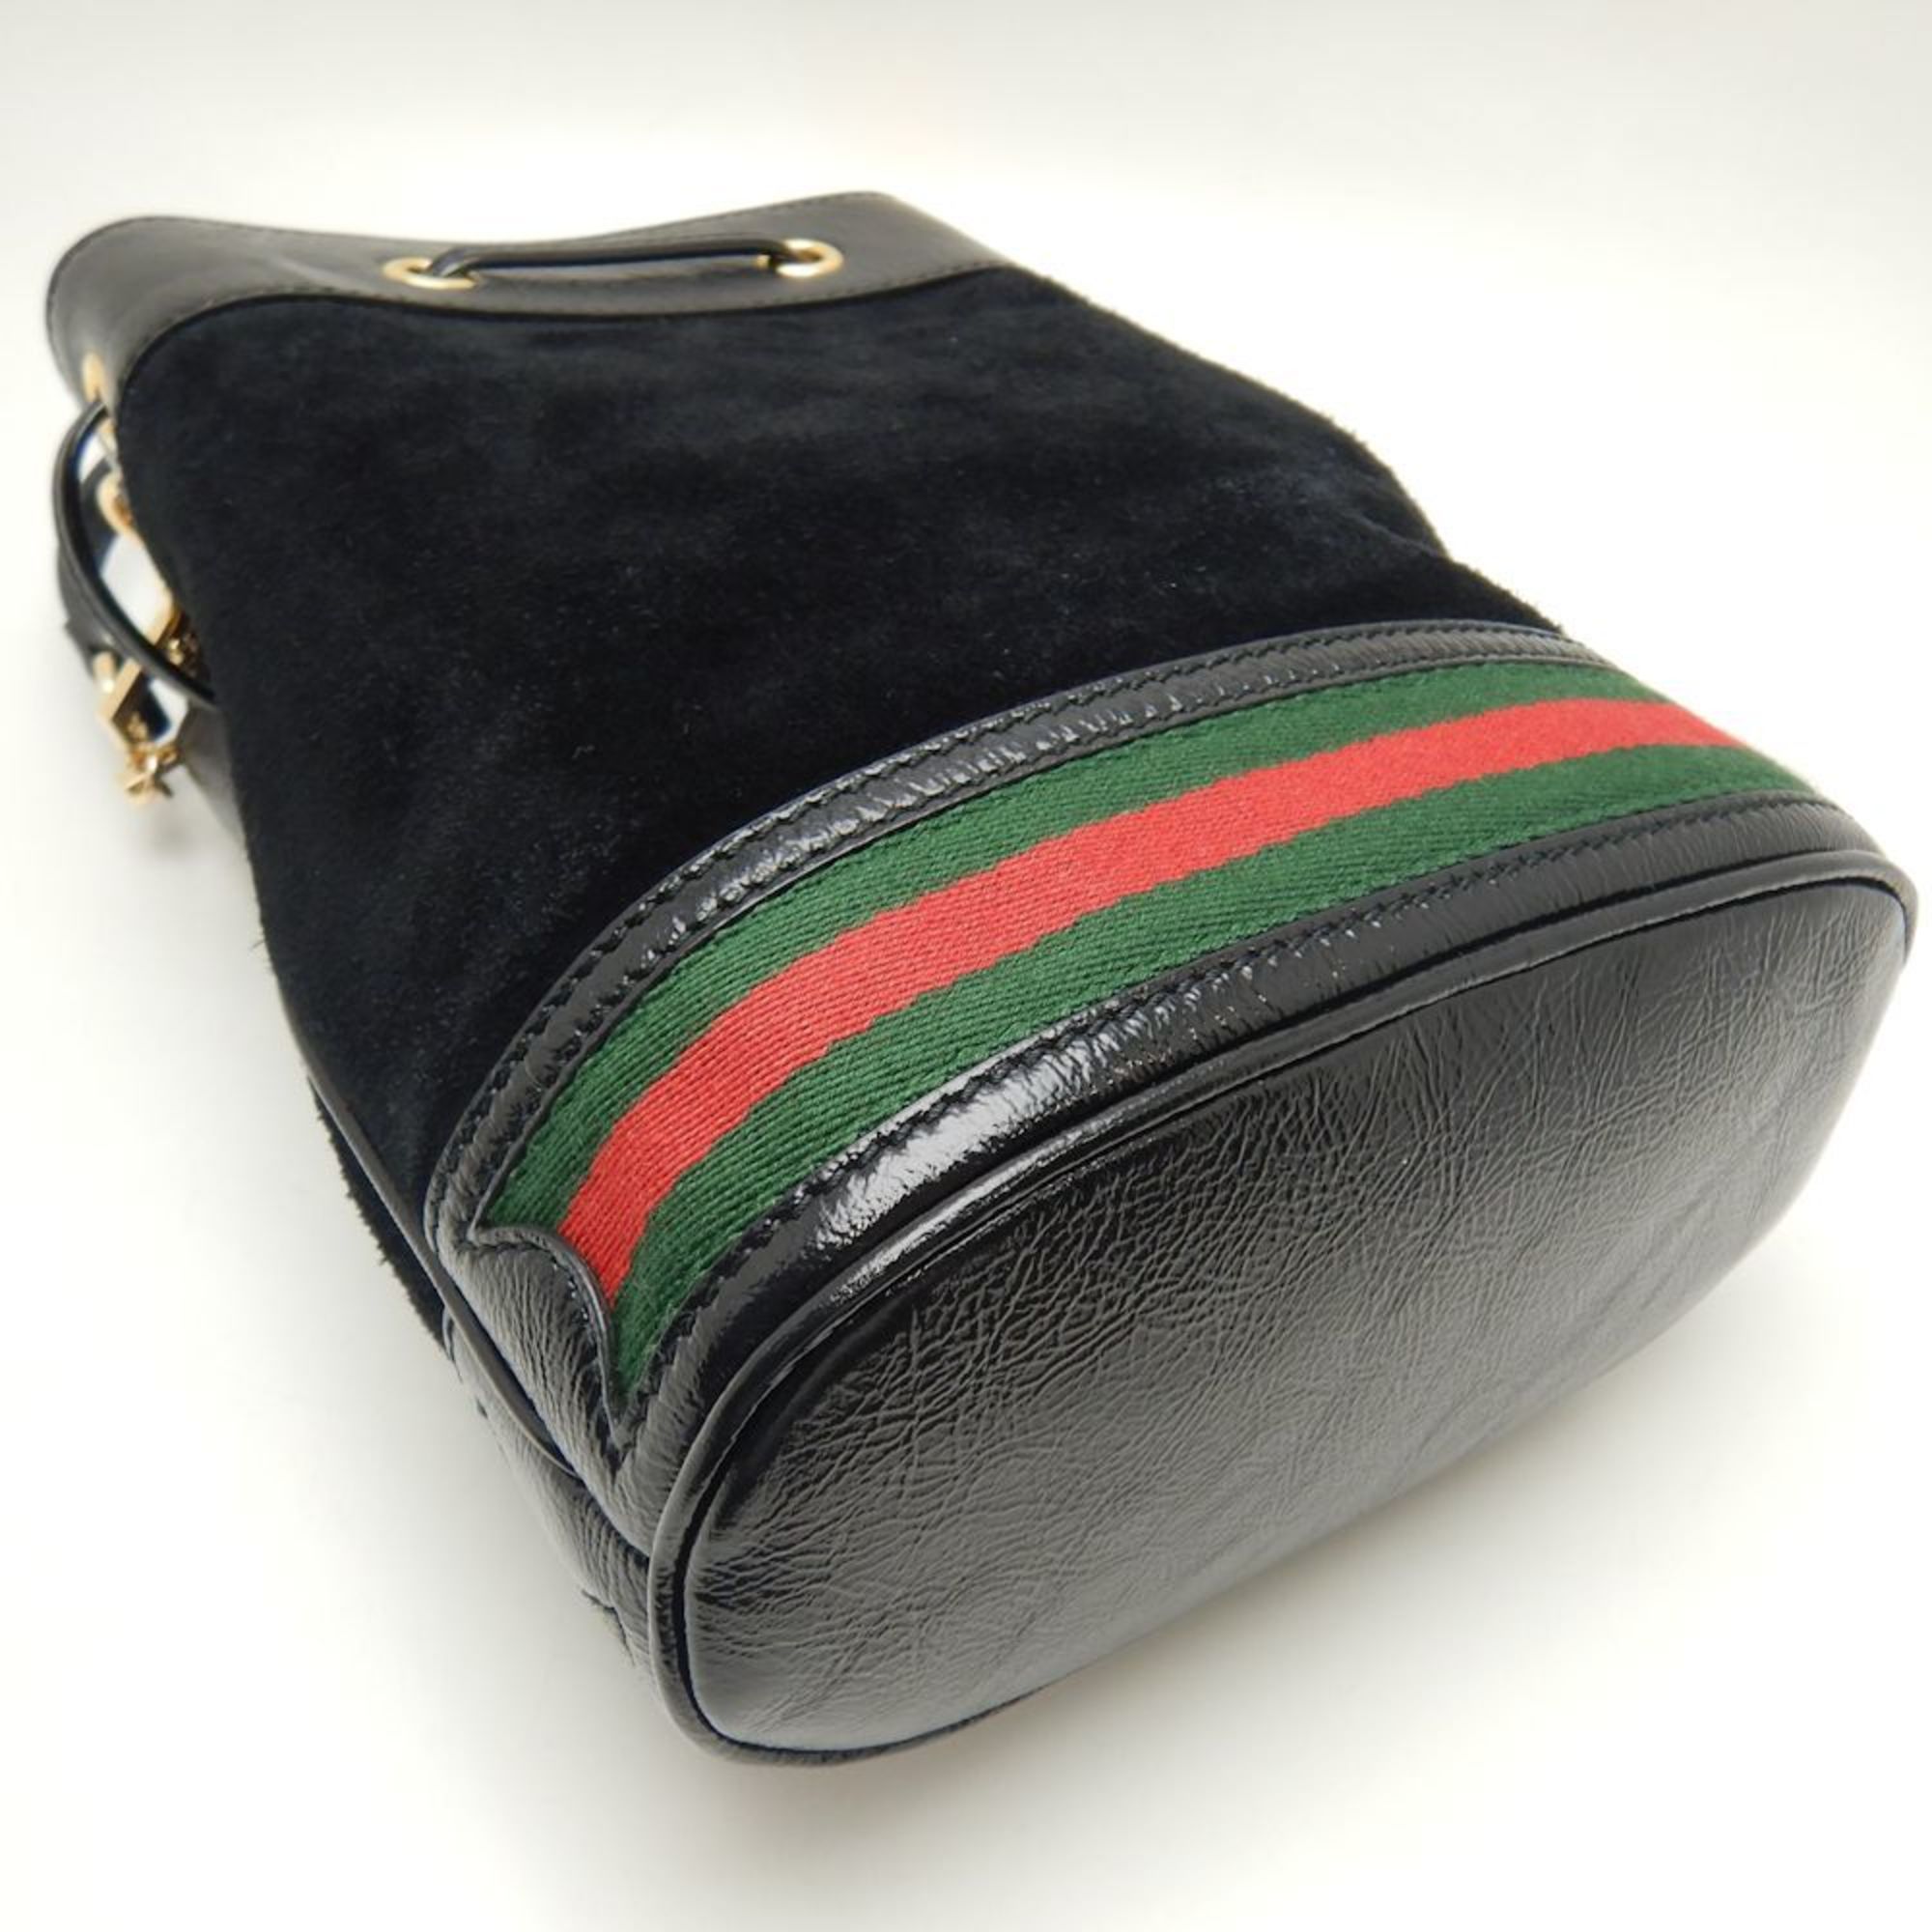 GUCCI Small Bucket Bag 550621 Shoulder 2WAY Ophidia Suede x Patent Leather Black 250612